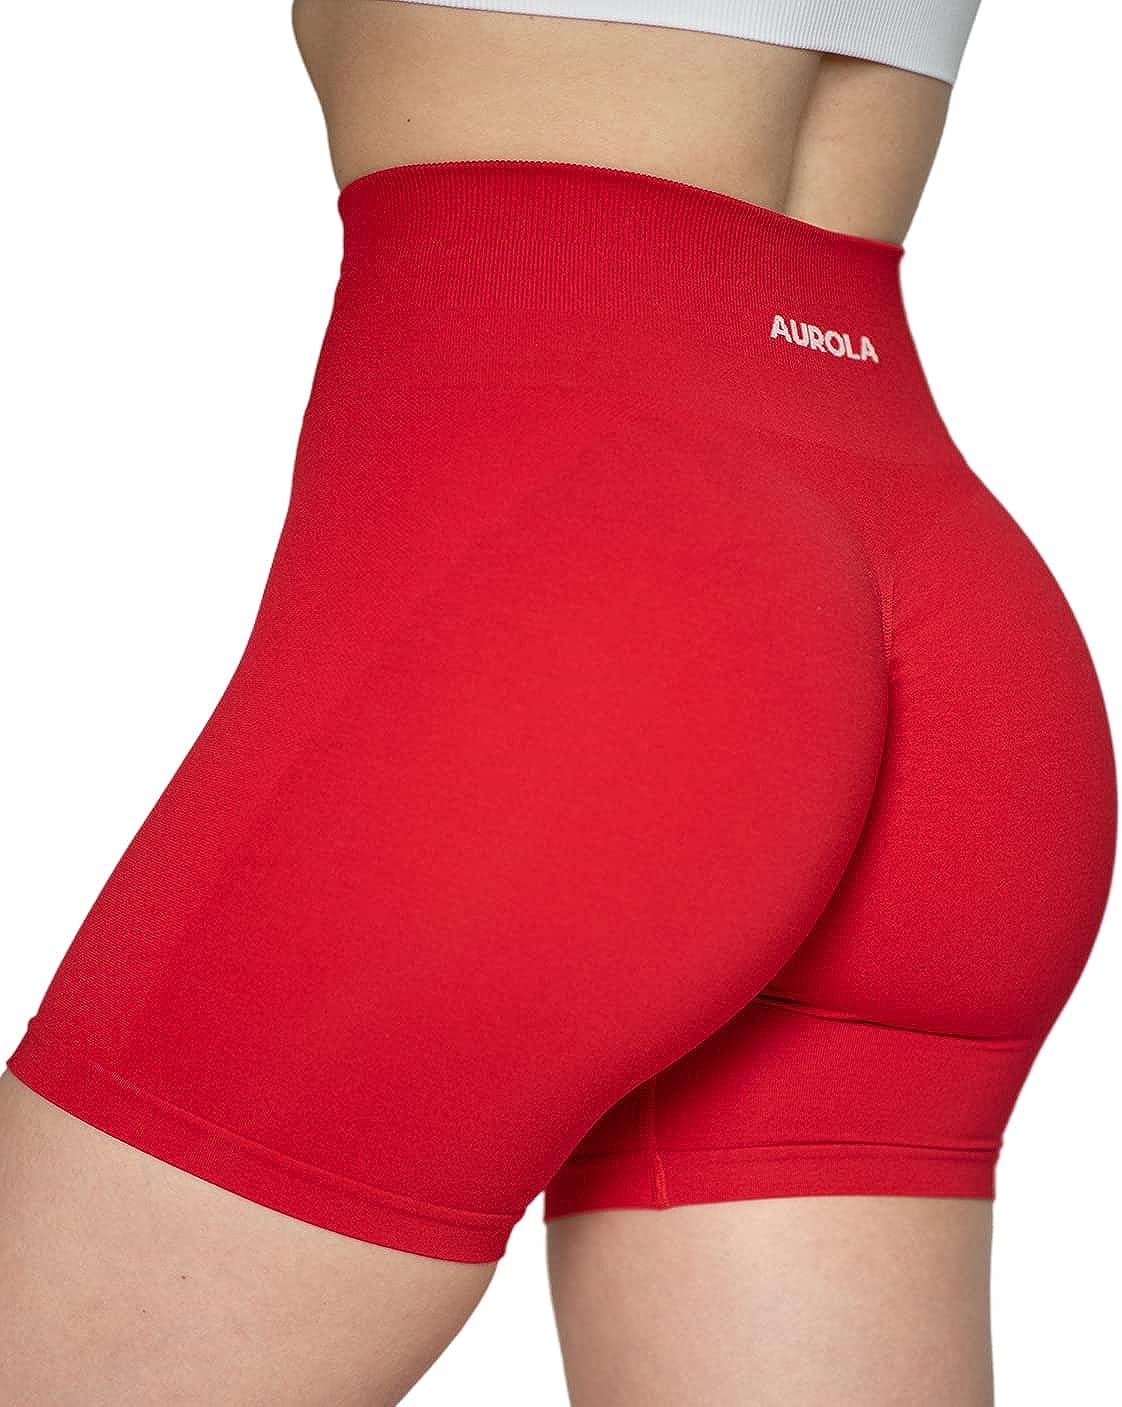 FIRST RANK AUROLA Intensify Shorts for Seamless Scrunch – AND MORE